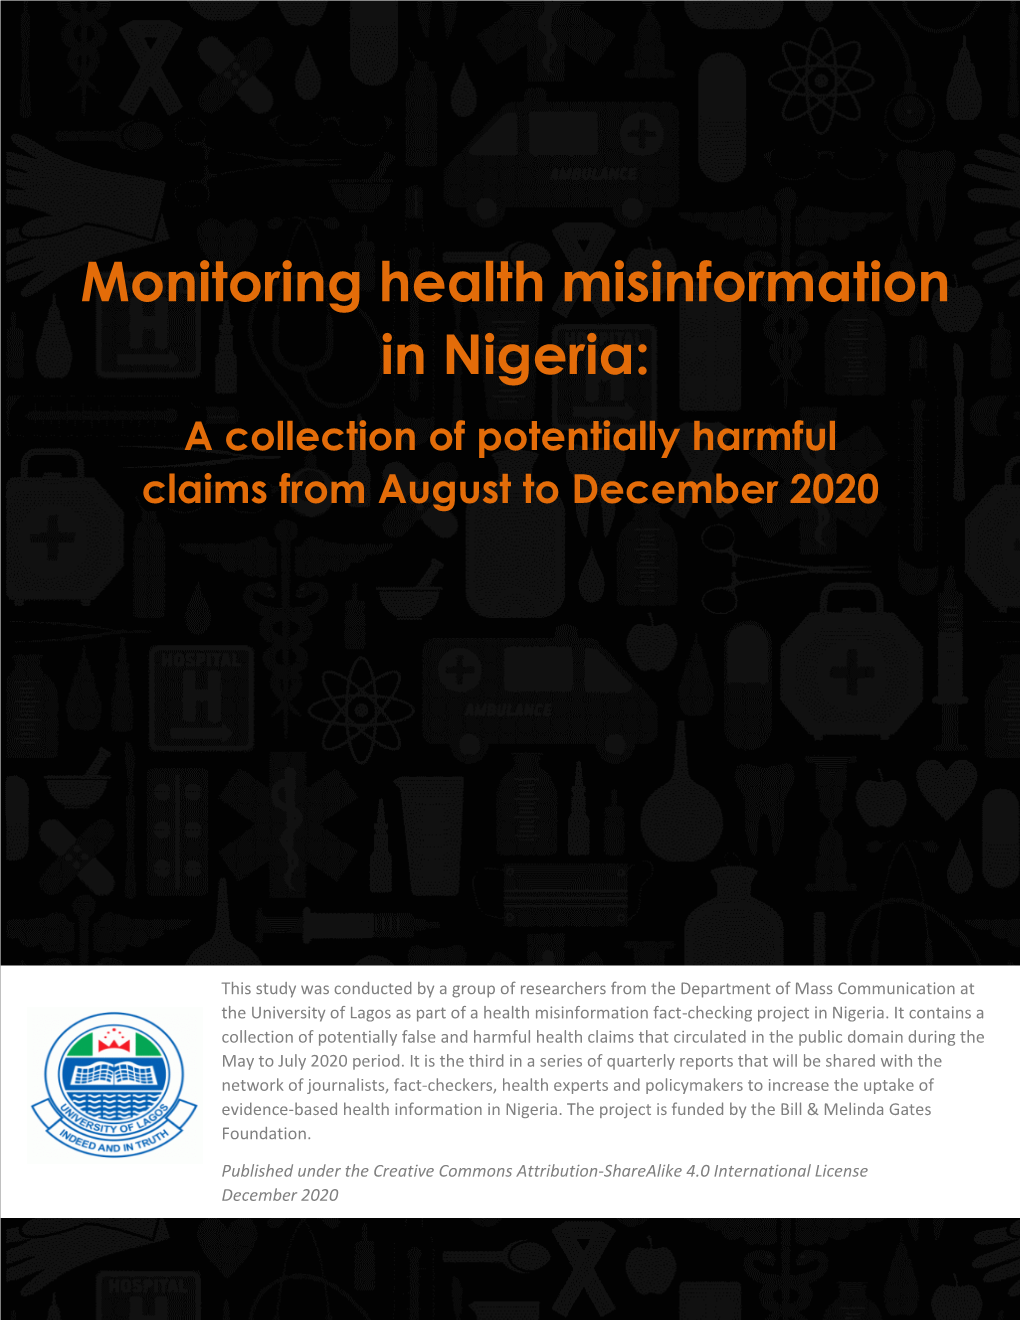 Monitoring Health Misinformation in Nigeria: a Collection of Potentially Harmful